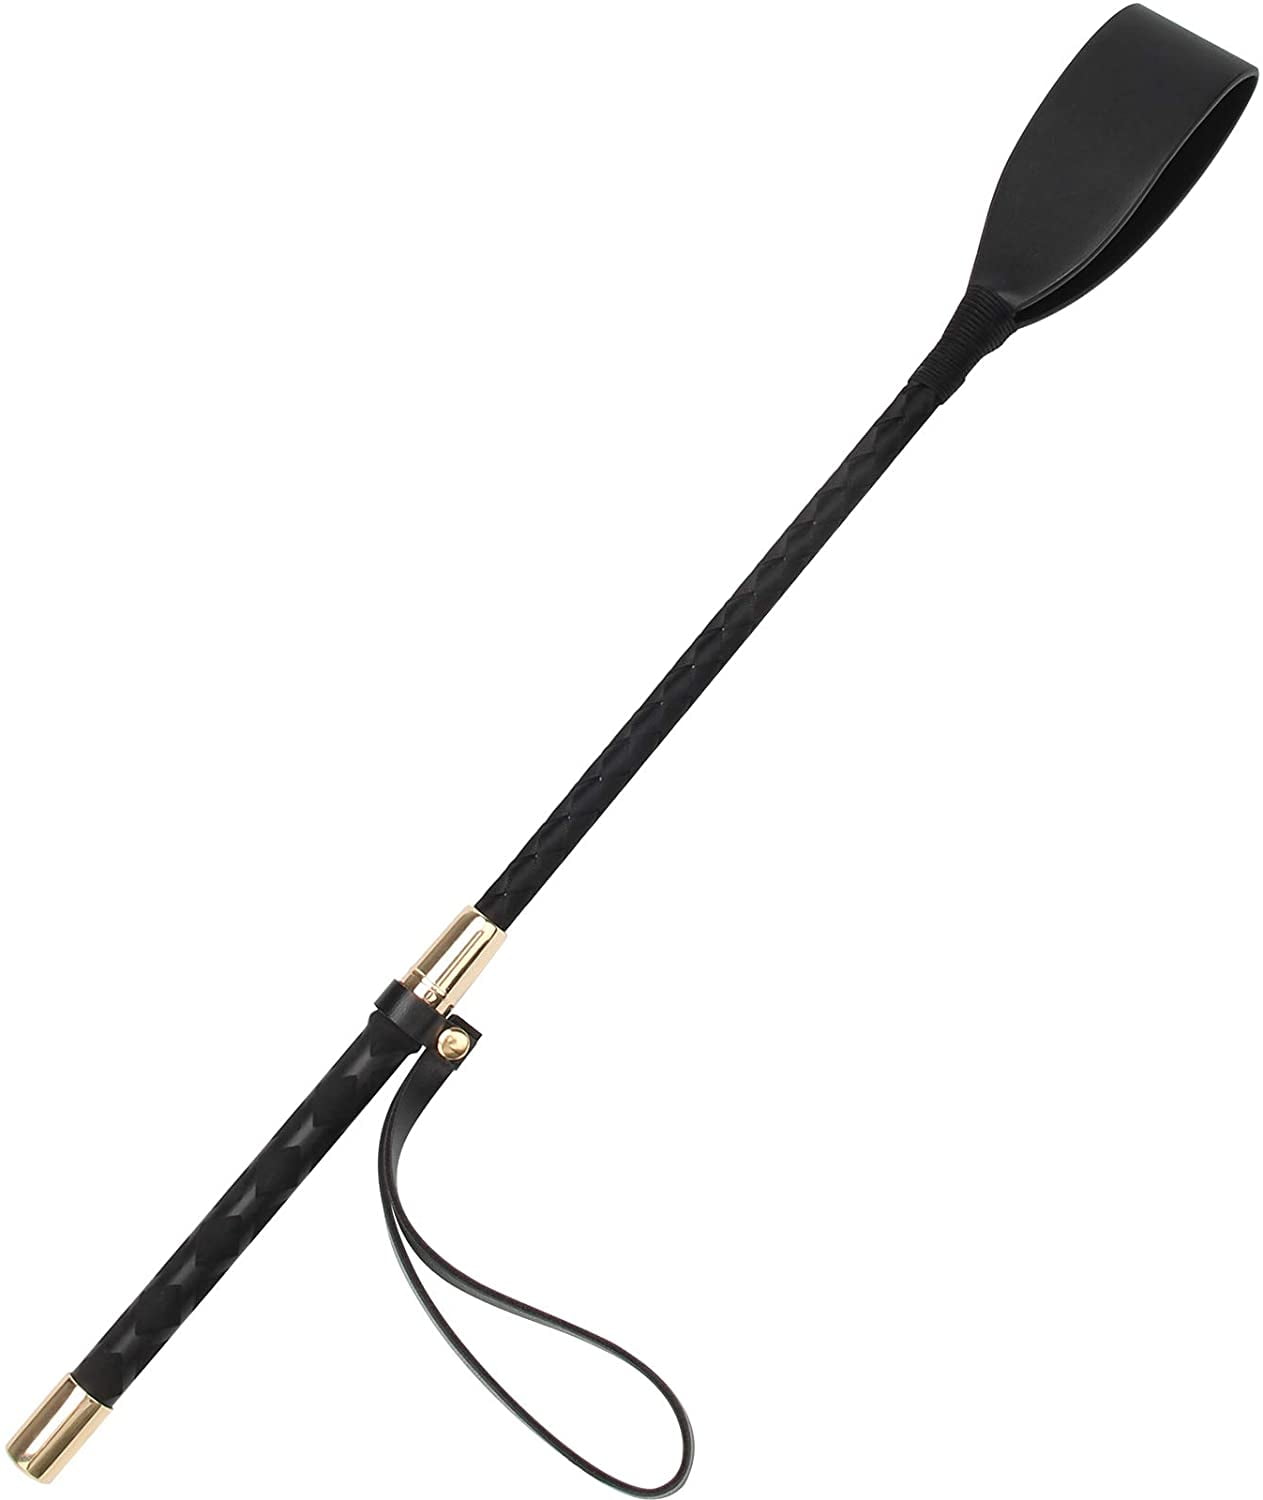 Riding Couples for Equestrian Training 24 Leather Horse Whip Play Black Riding Crop Whip Equestrian Horse Sport Paddle 